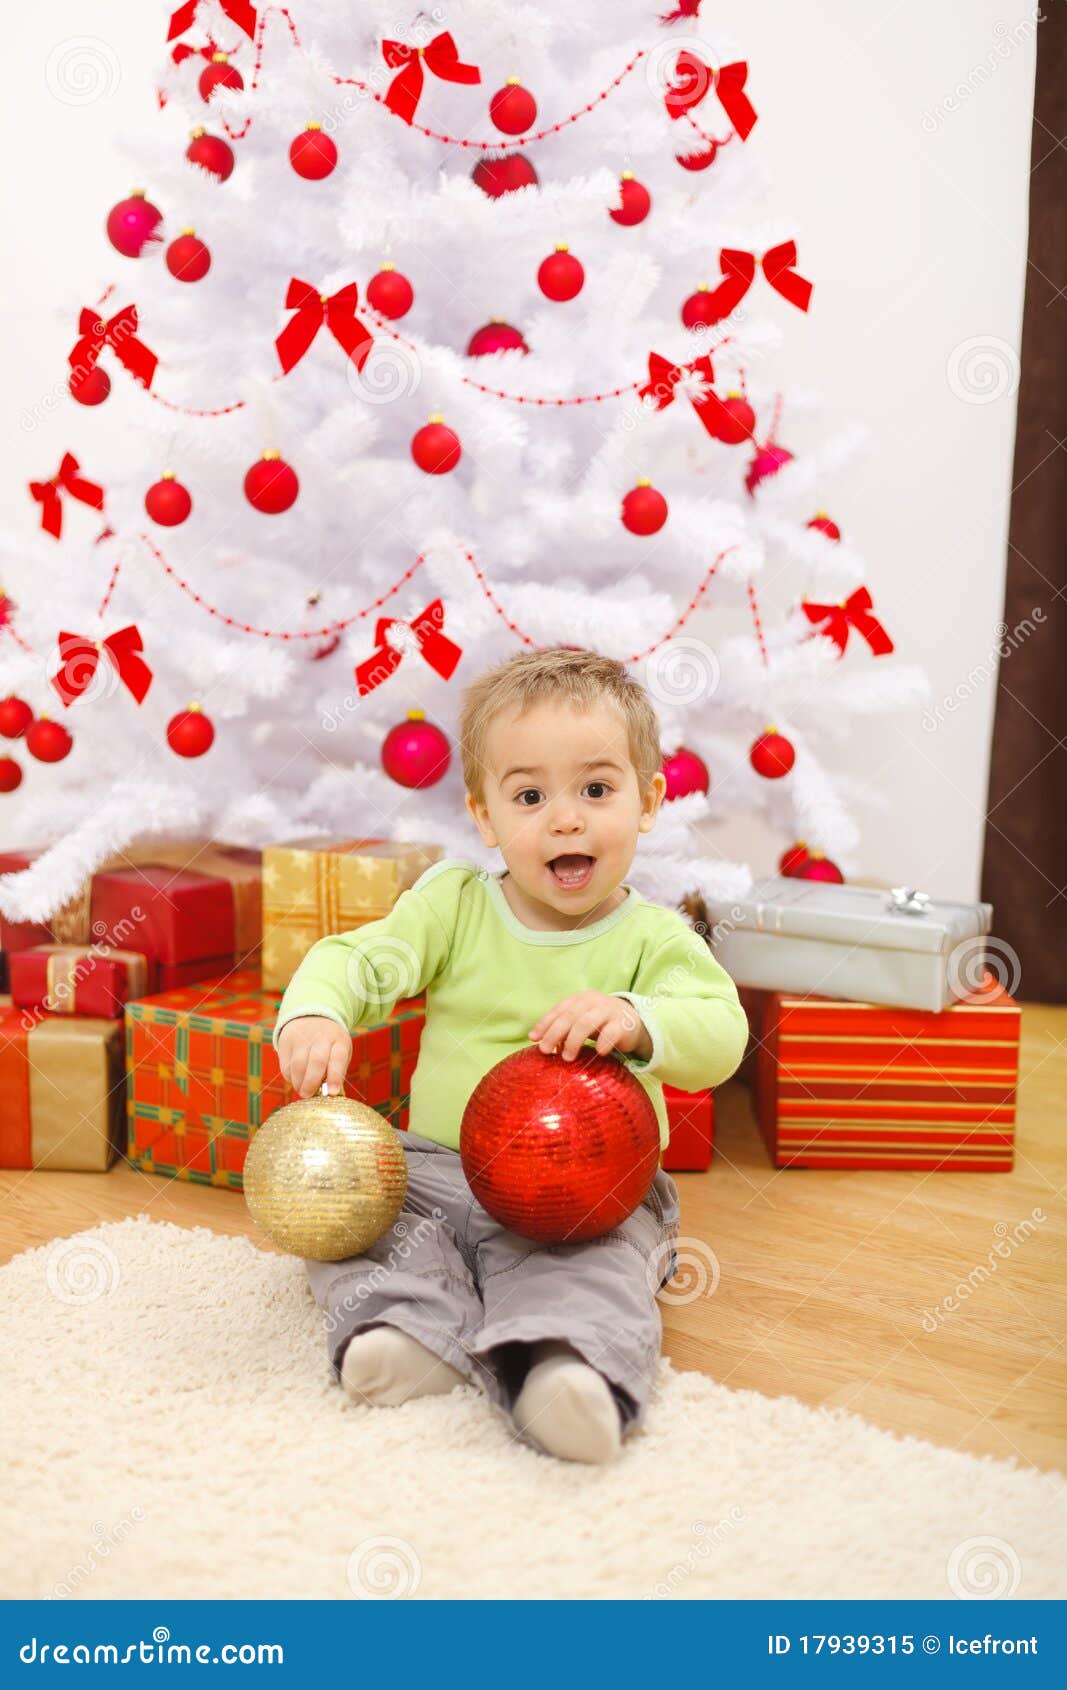 Happy Little Boy with Big Christmas Ornaments Stock Image - Image of ...